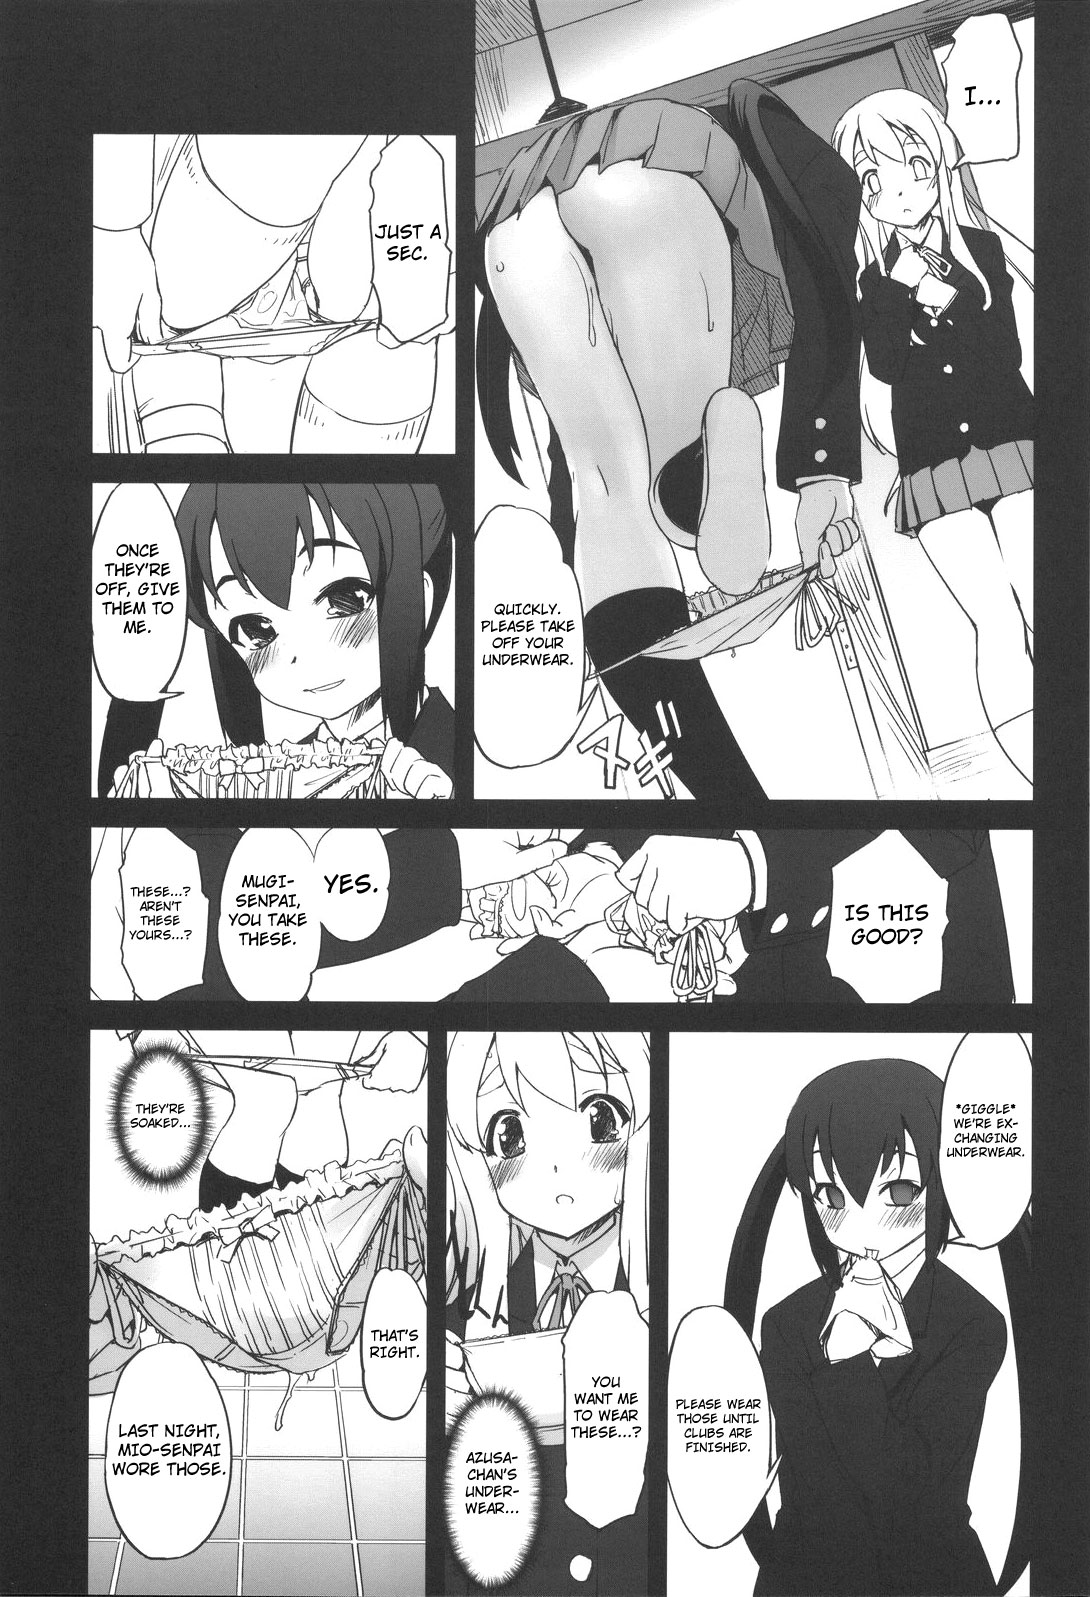 (C76) [G-Power! (Sasayuki)] Nekomimi to Toilet to Houkago no Bushitsu | Cat Ears And A Restroom And The Club Room After School (K-ON) [English] [Nicchiscans-4Dawgz] page 18 full